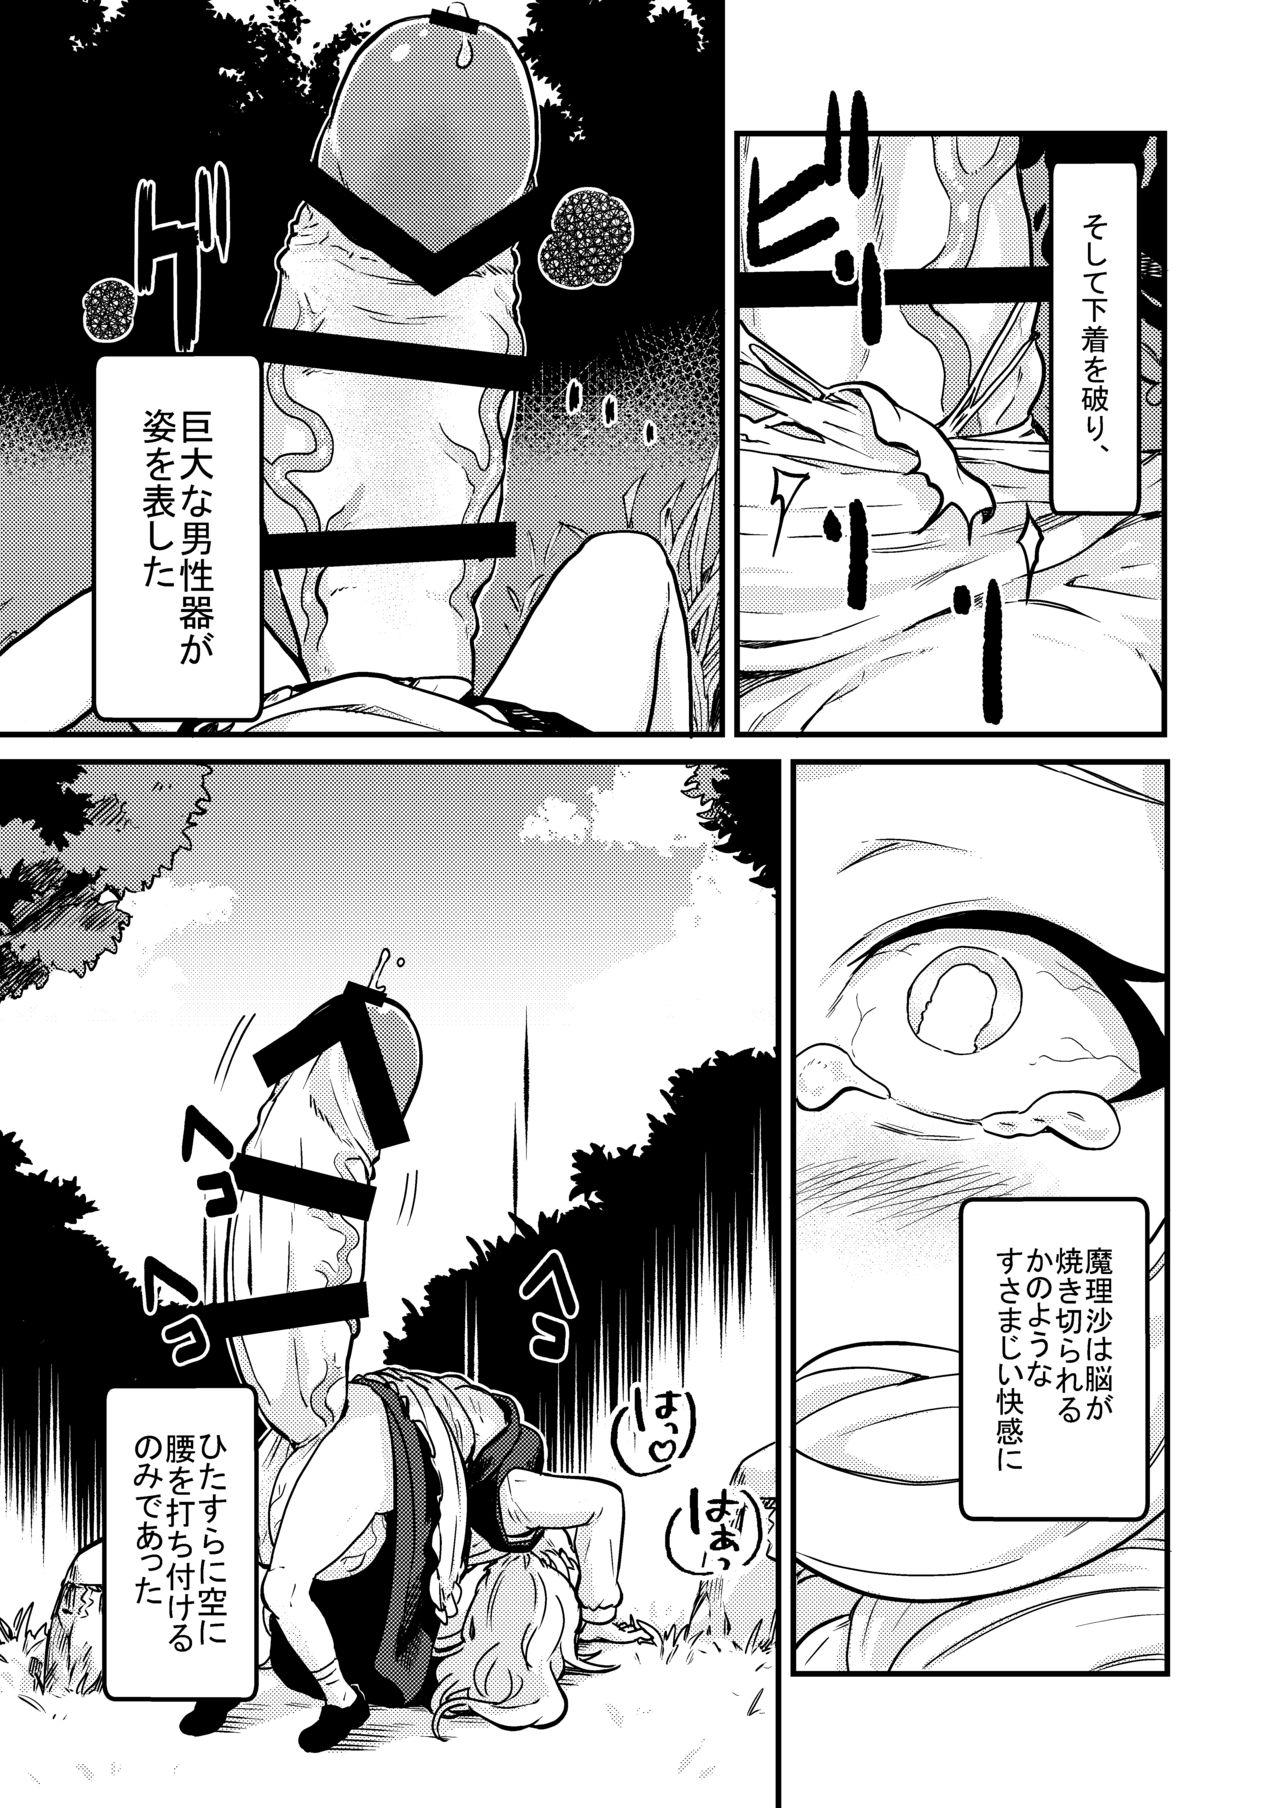 Tugging 魔理沙膨張破裂 - Touhou project Gay Brownhair - Page 8